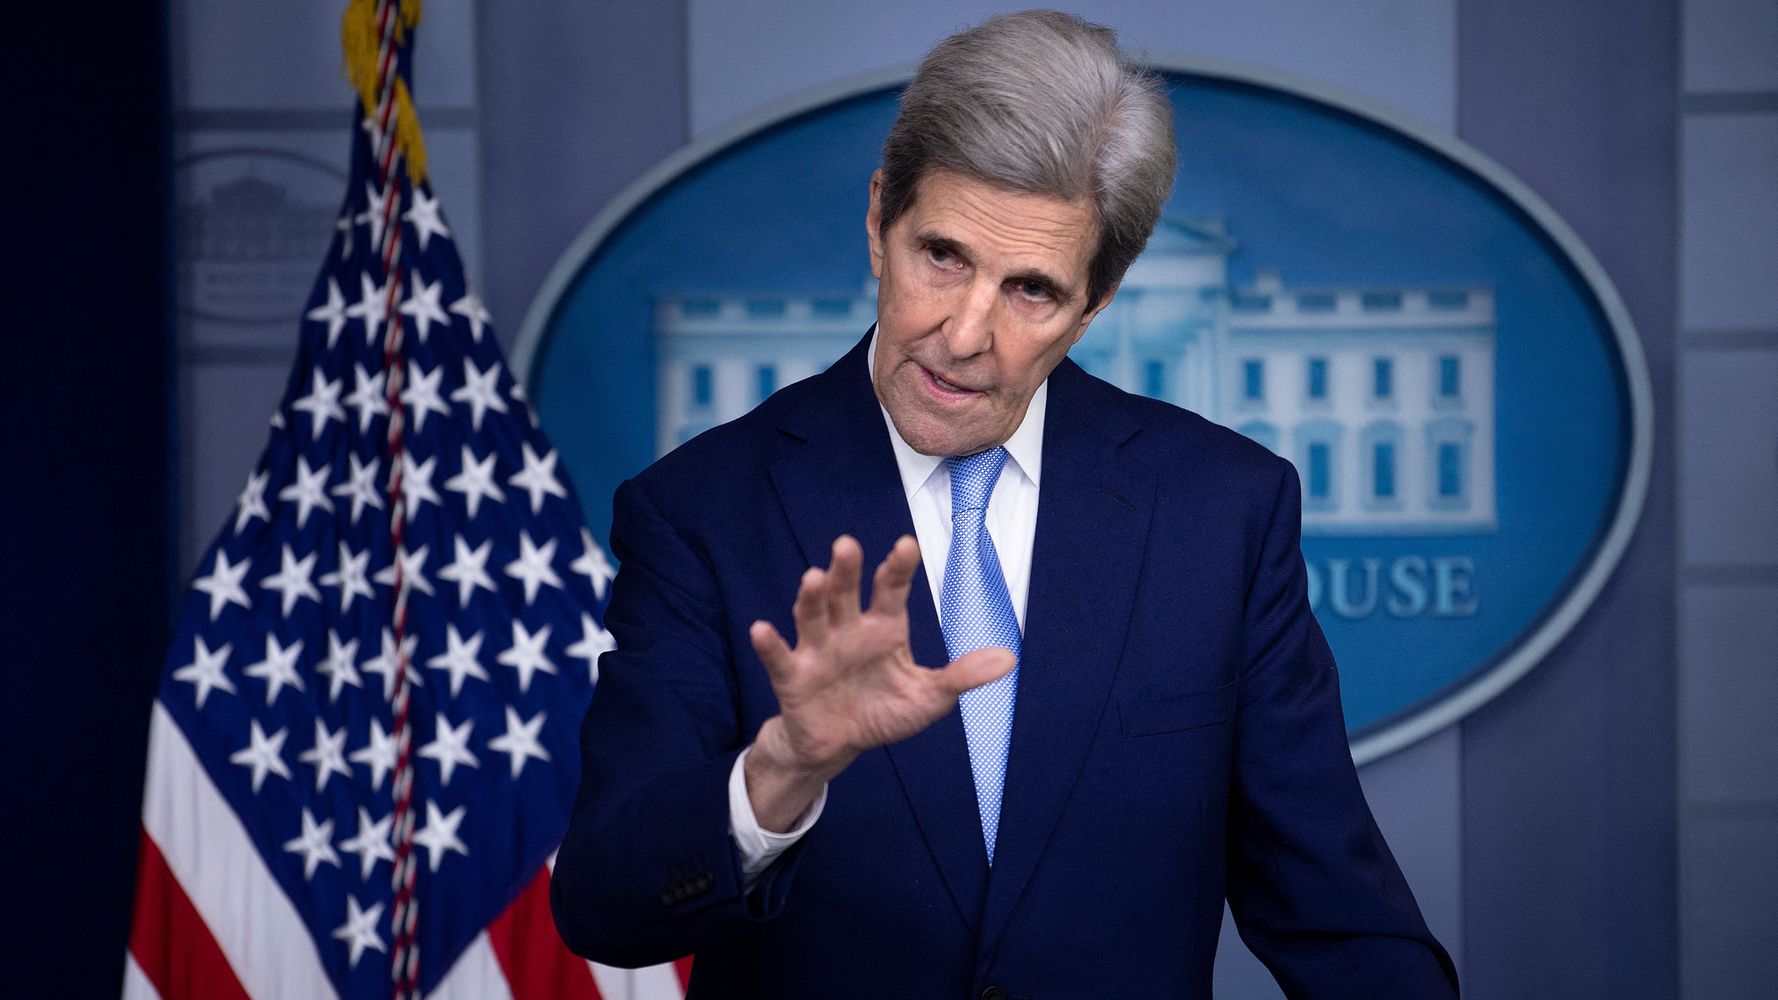 John Kerry’s Climate Warning: 'Even If We Get To Net Zero, We Need Carbon Removal'